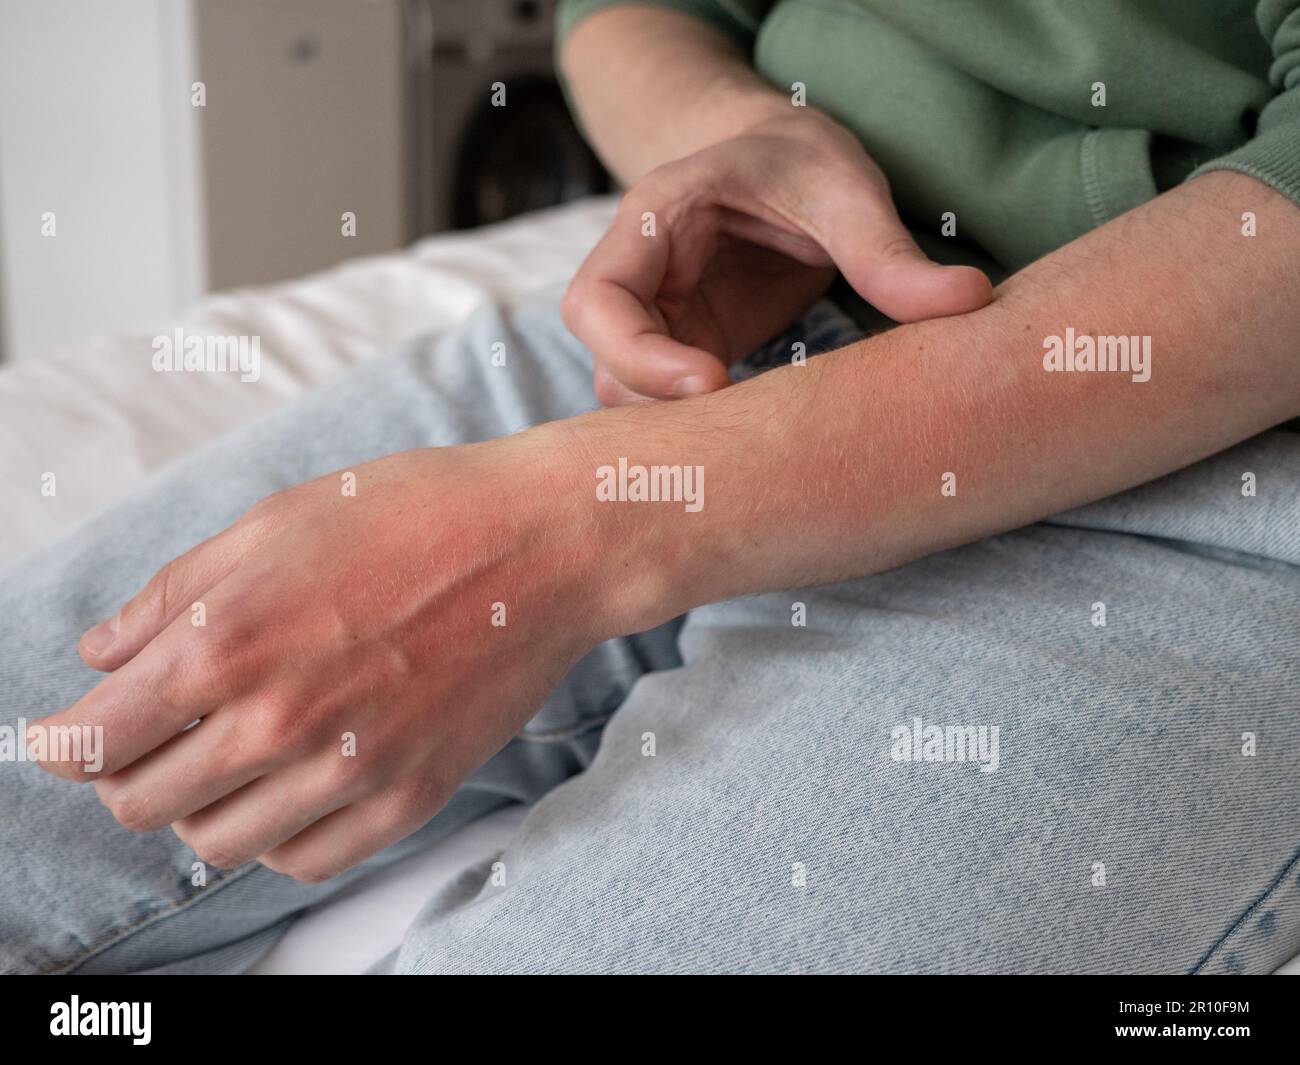 Man scratches hand, red damaged skin. Excoriation neurotic disorder, skin scratching, emotional stress or allergies. Stock Photo